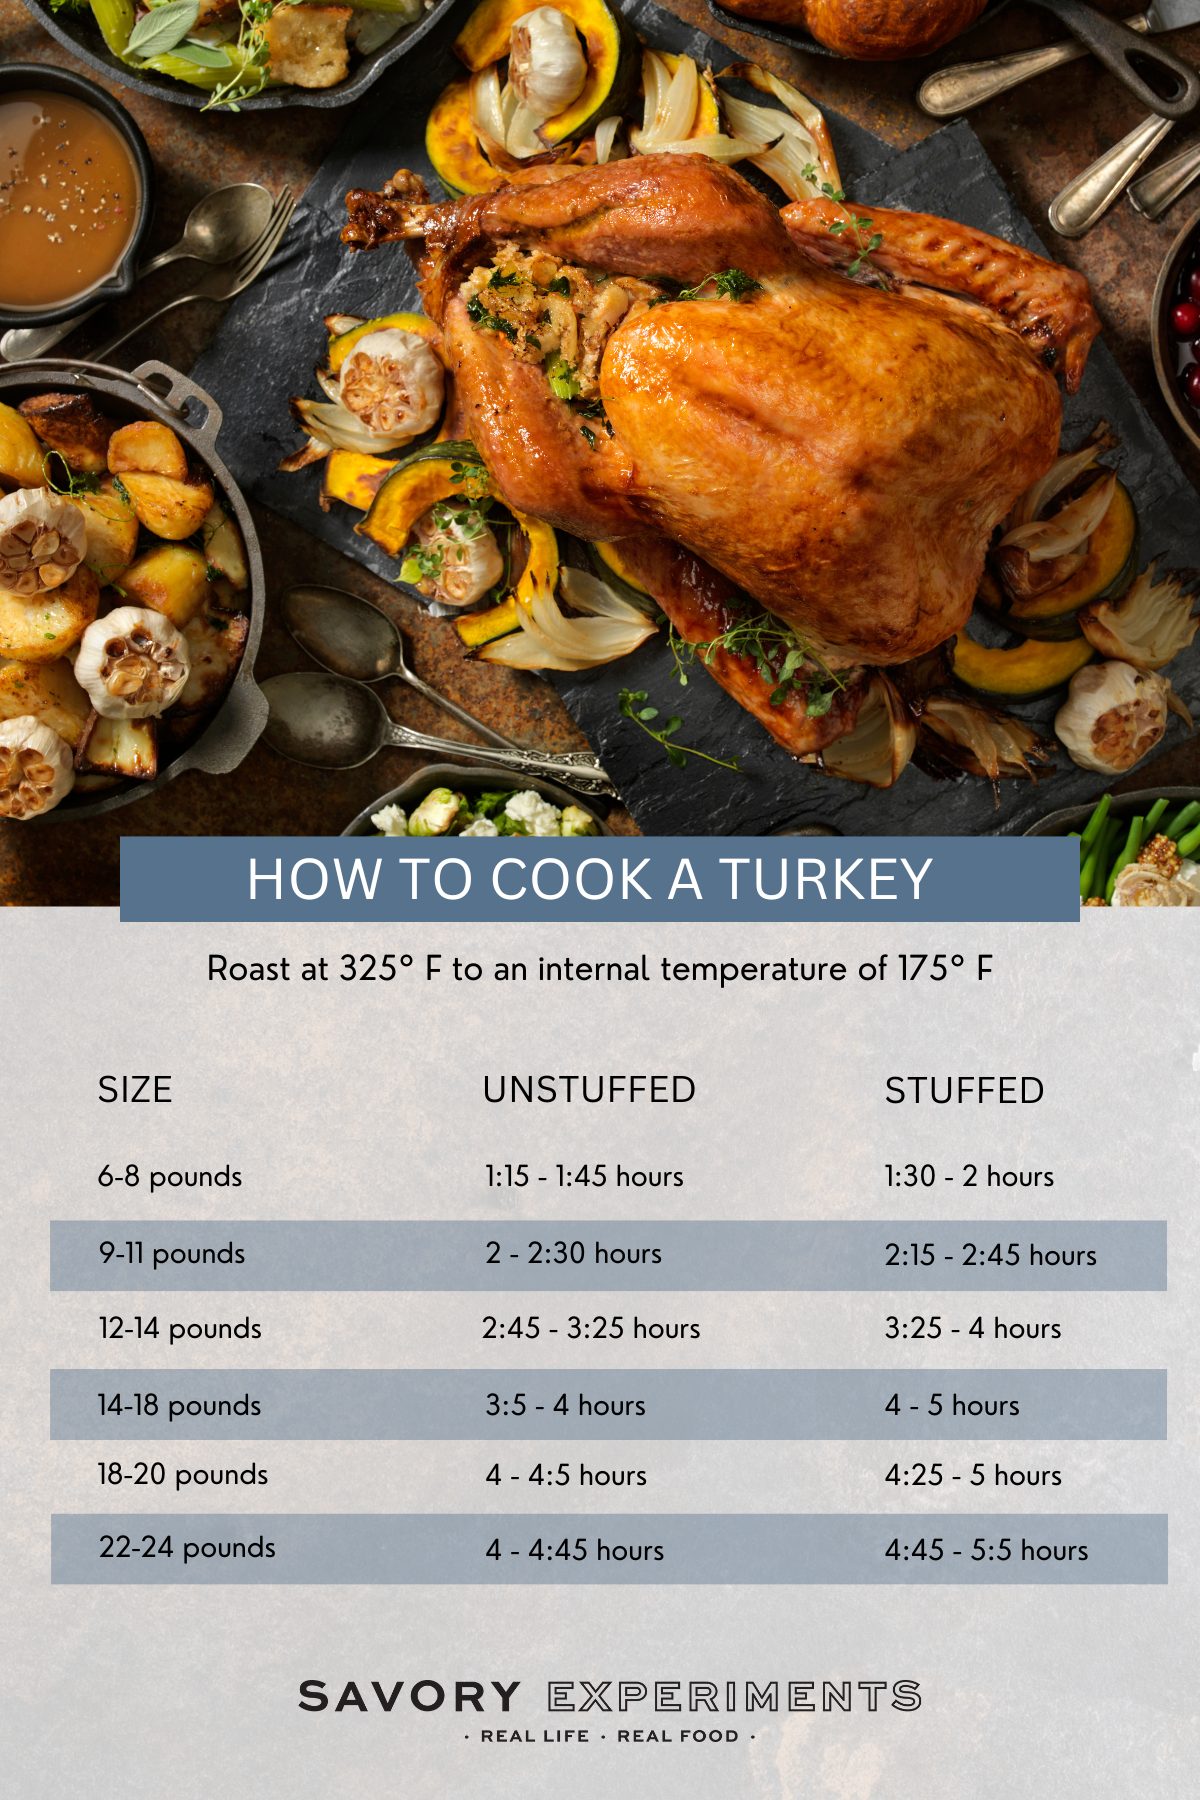 what to inject a turkey with before baking